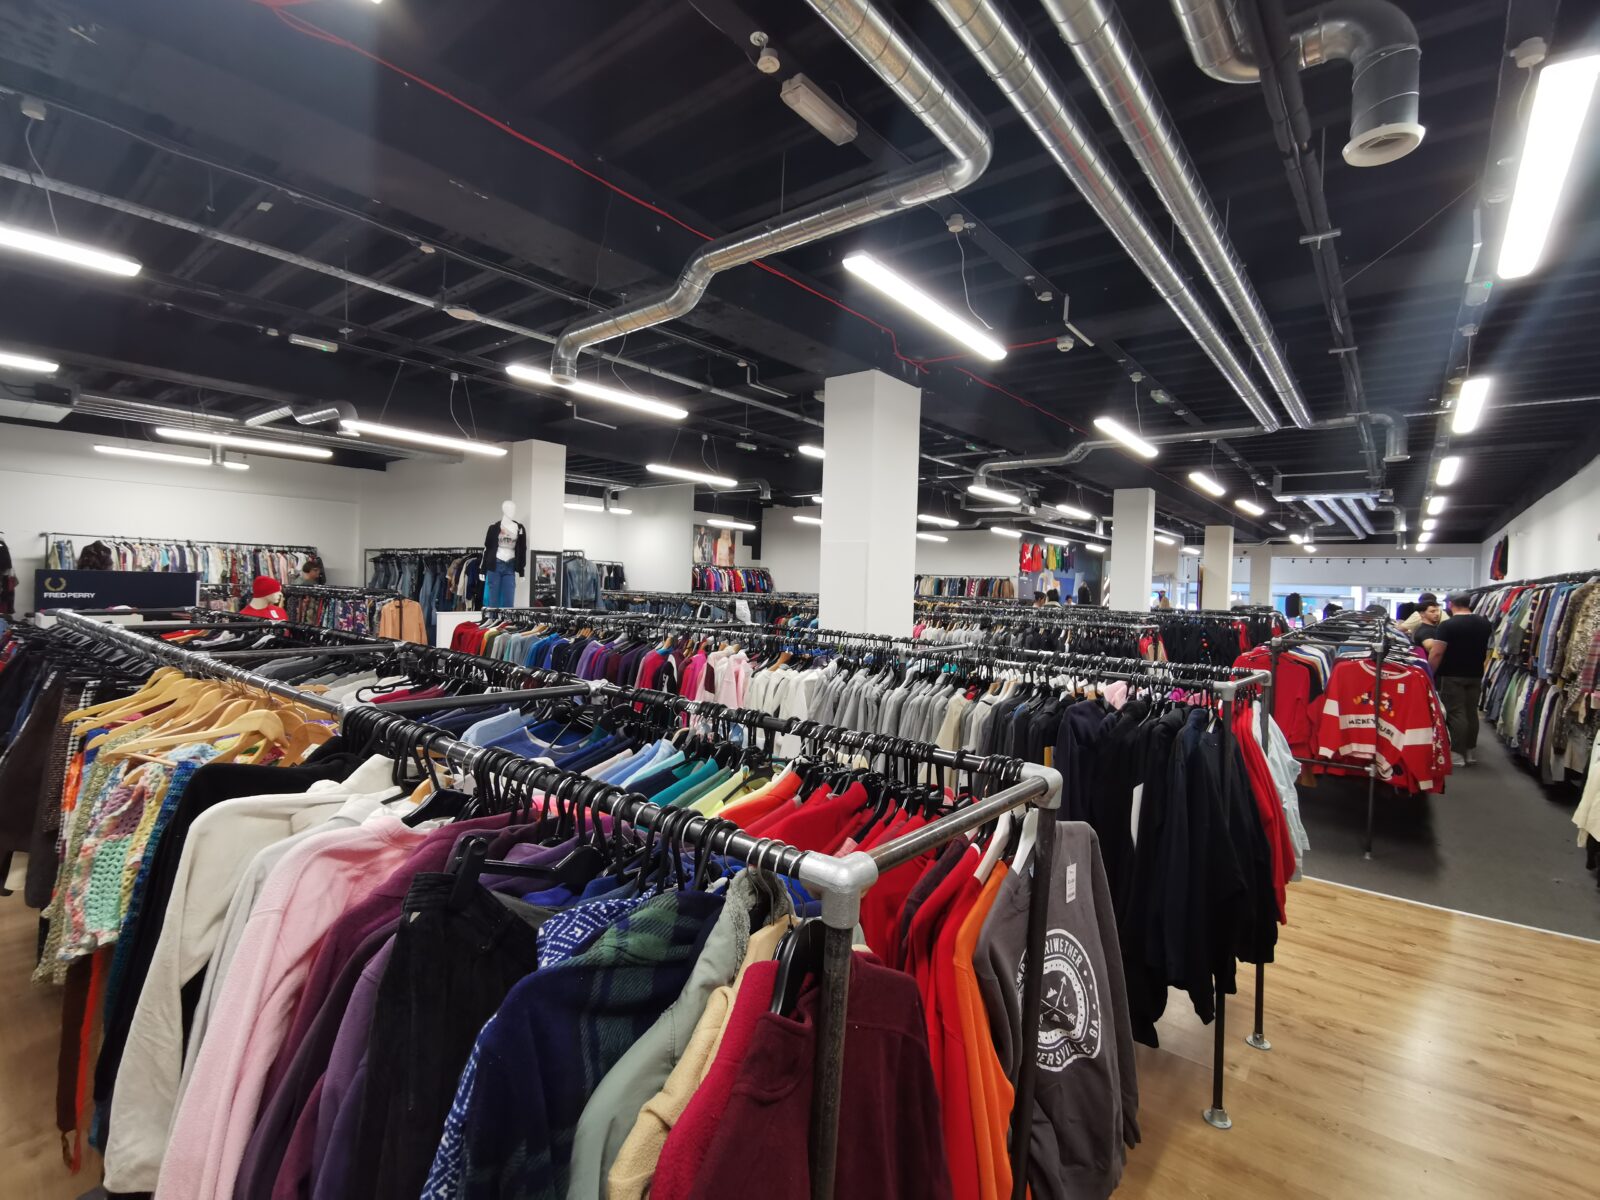 A massive second-hand clothes shop has opened in Manchester